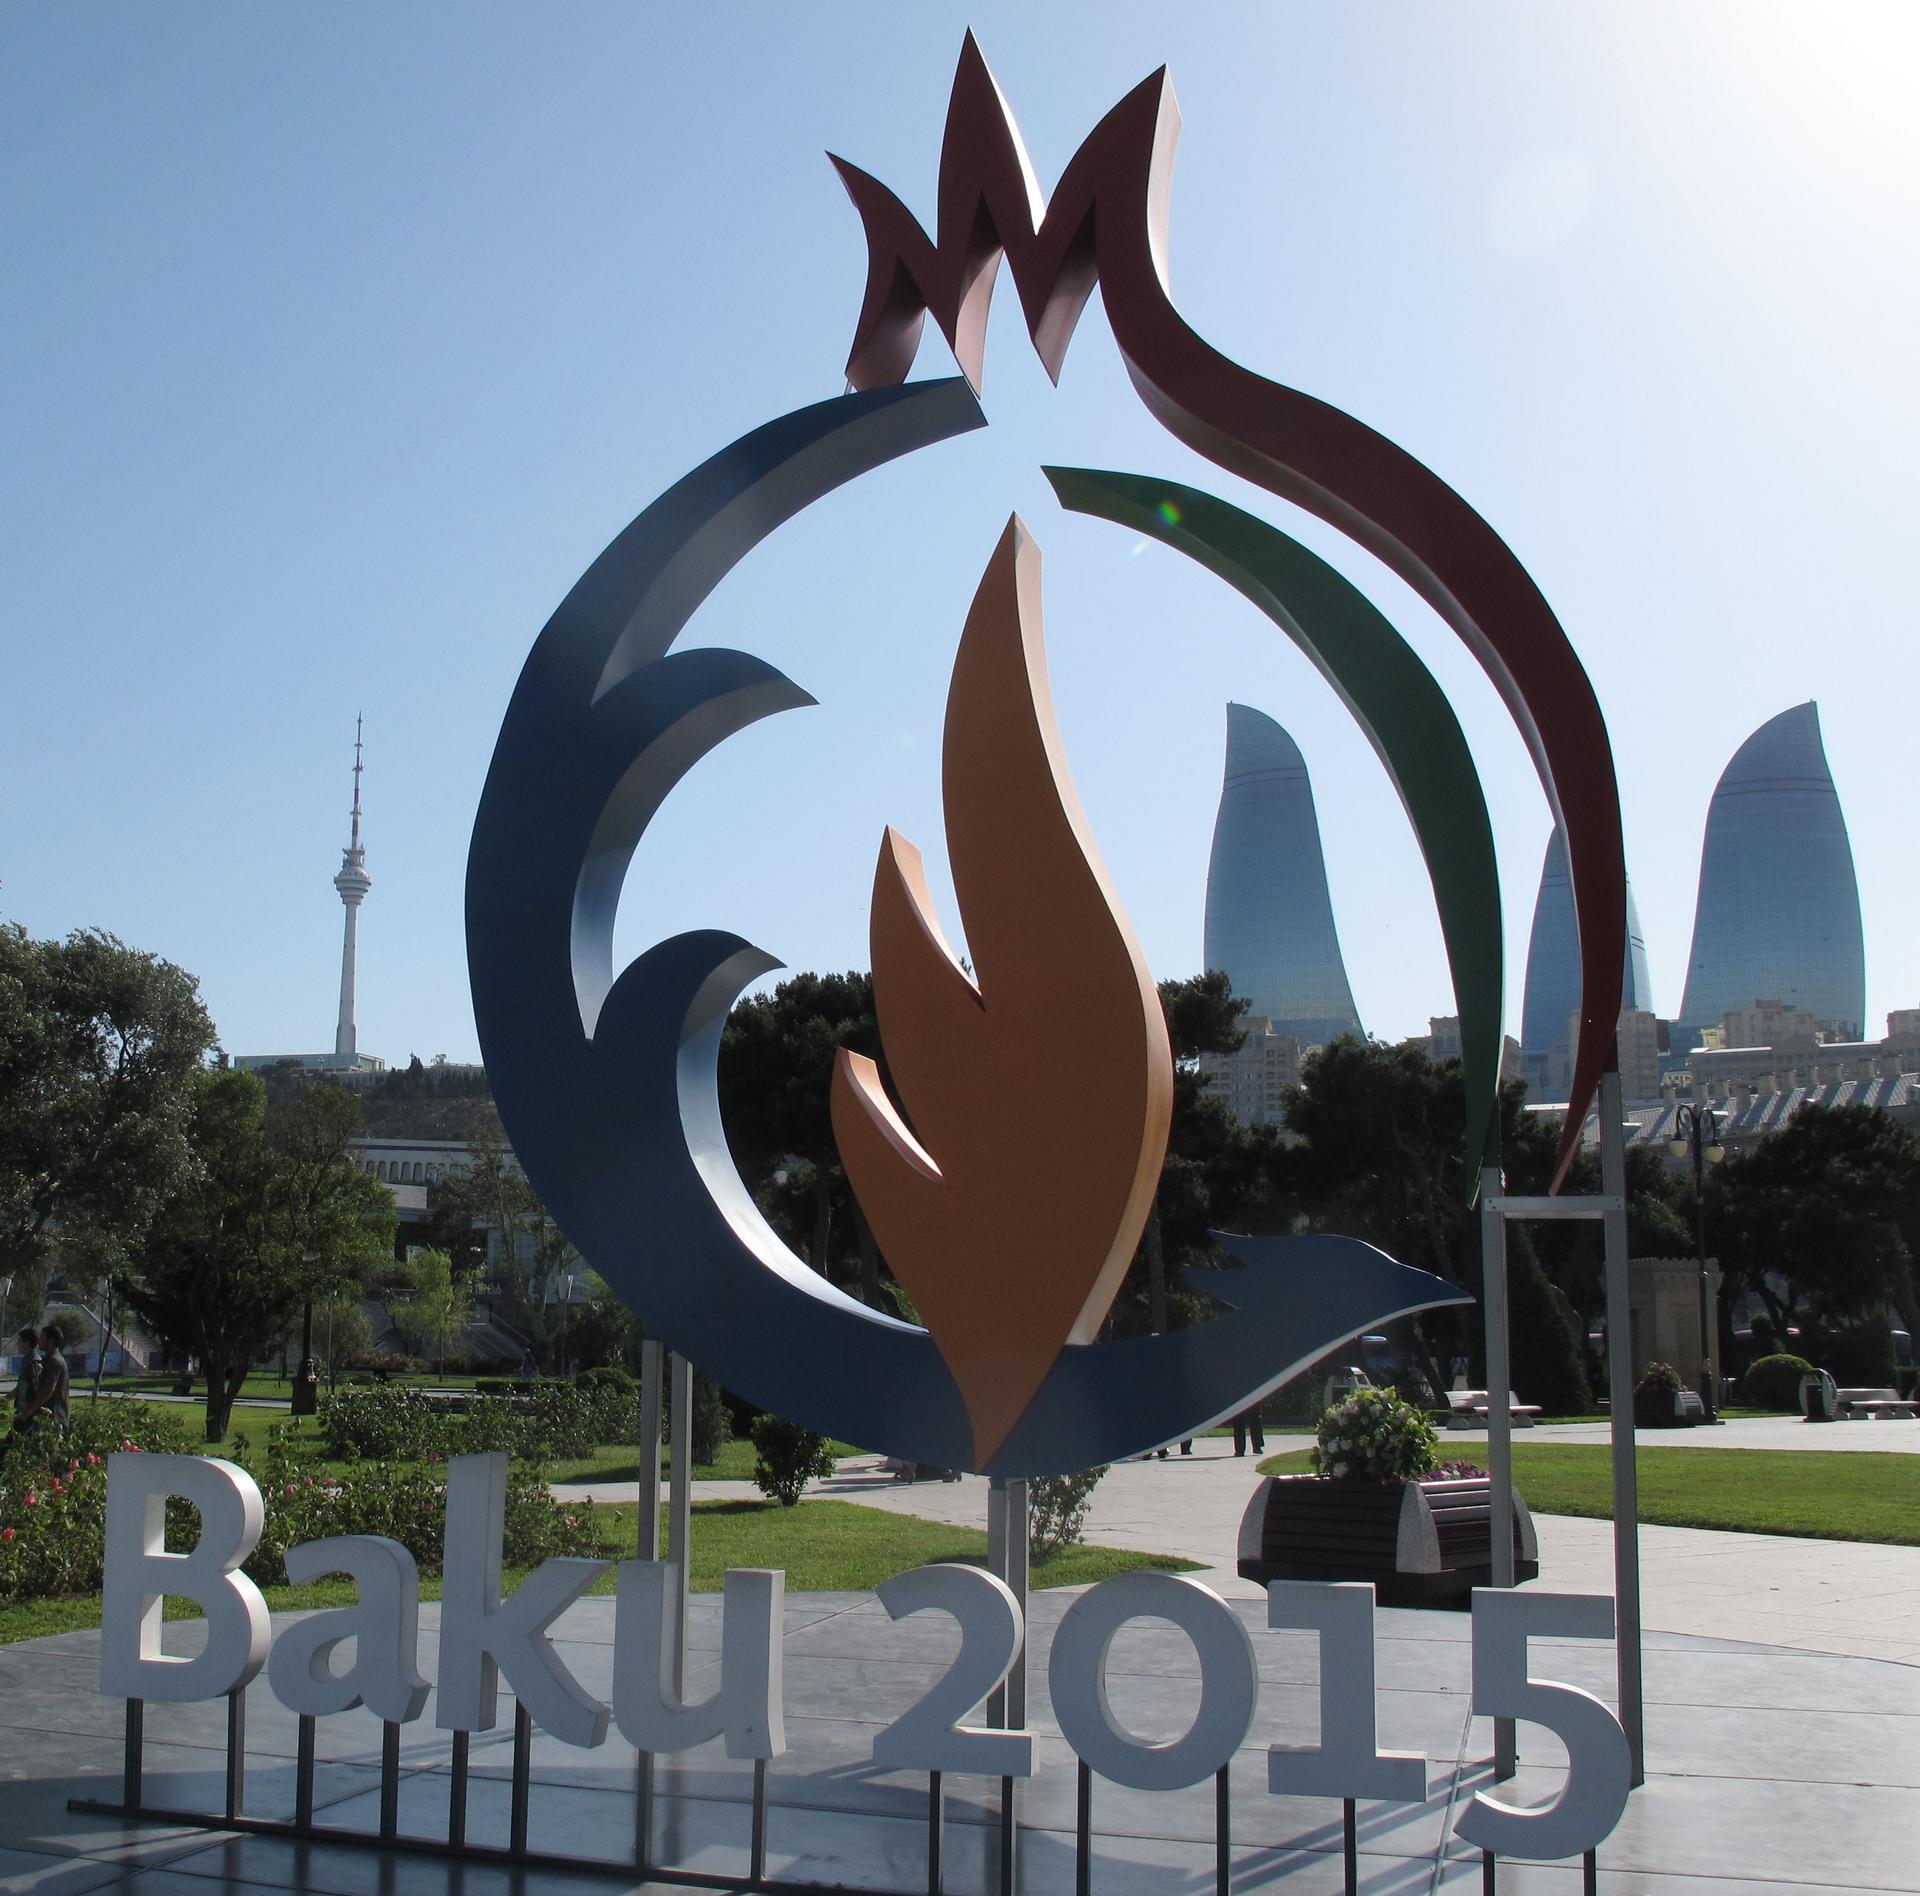 Azerbaijan is reveling in the first-ever European Games taking place in its capital, Baku